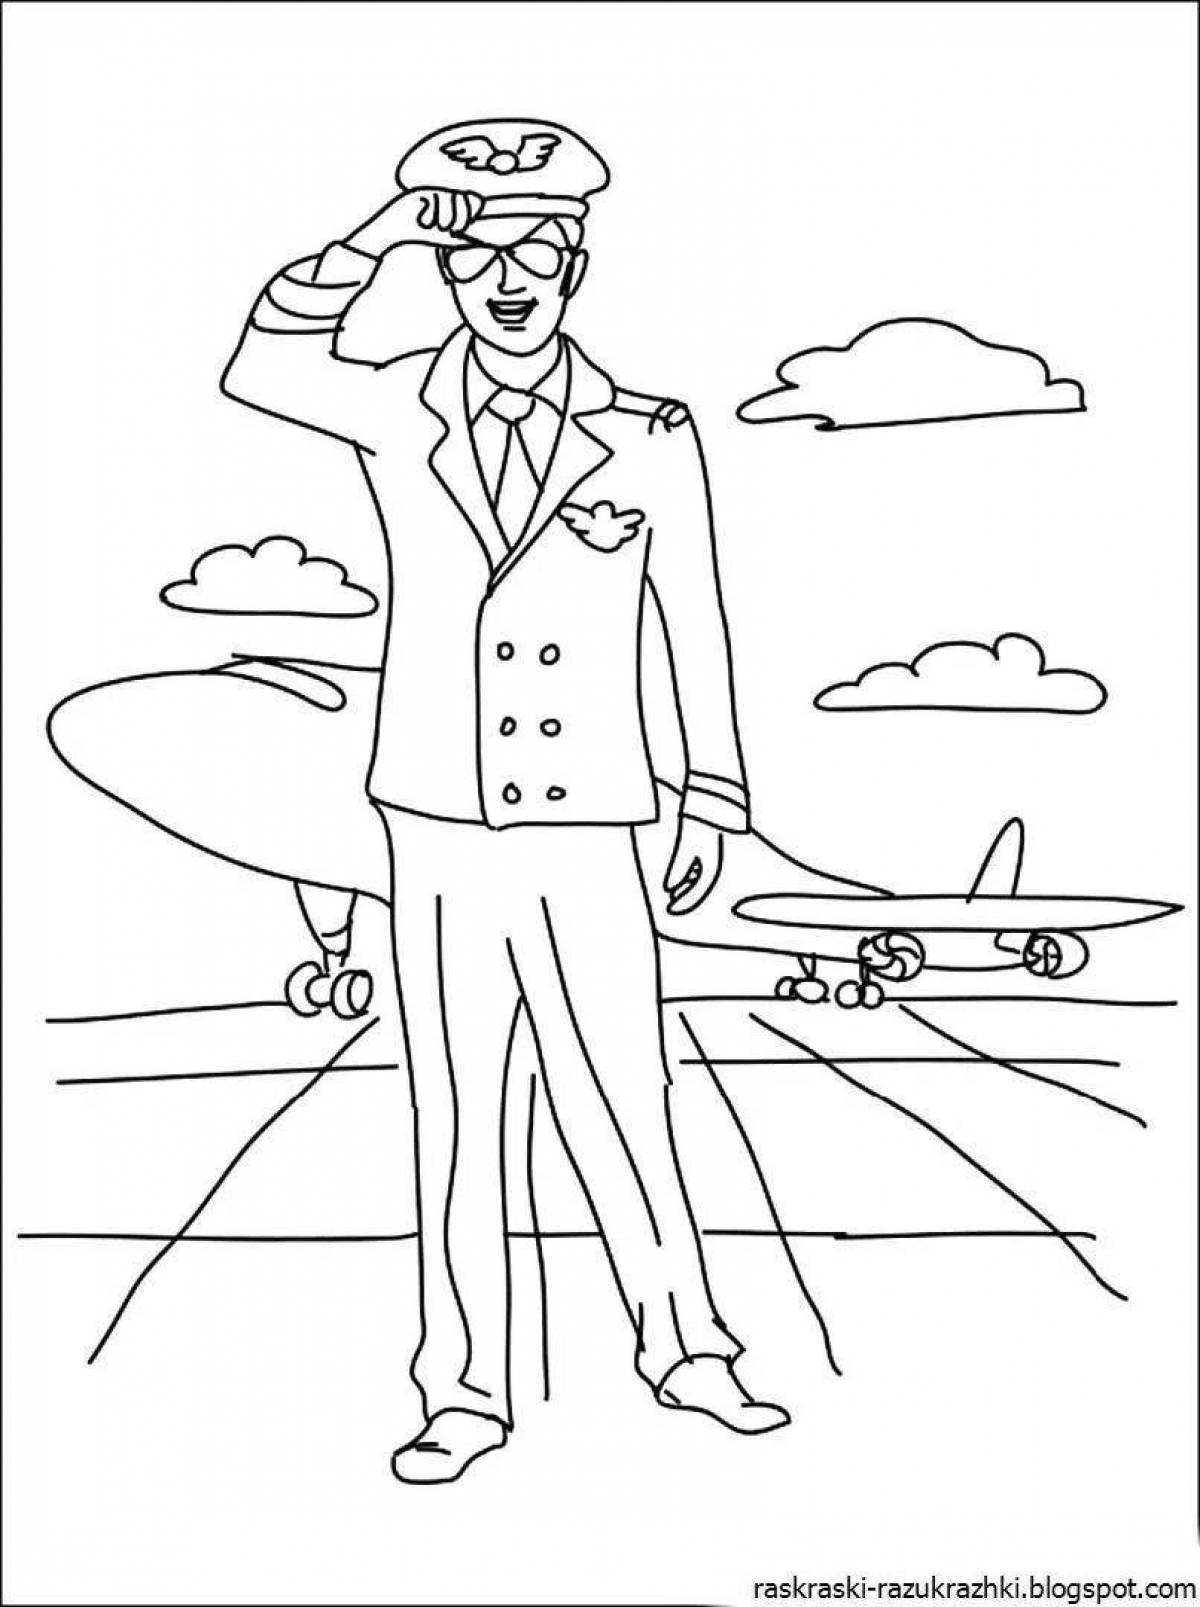 Fabulous military profession coloring for youth